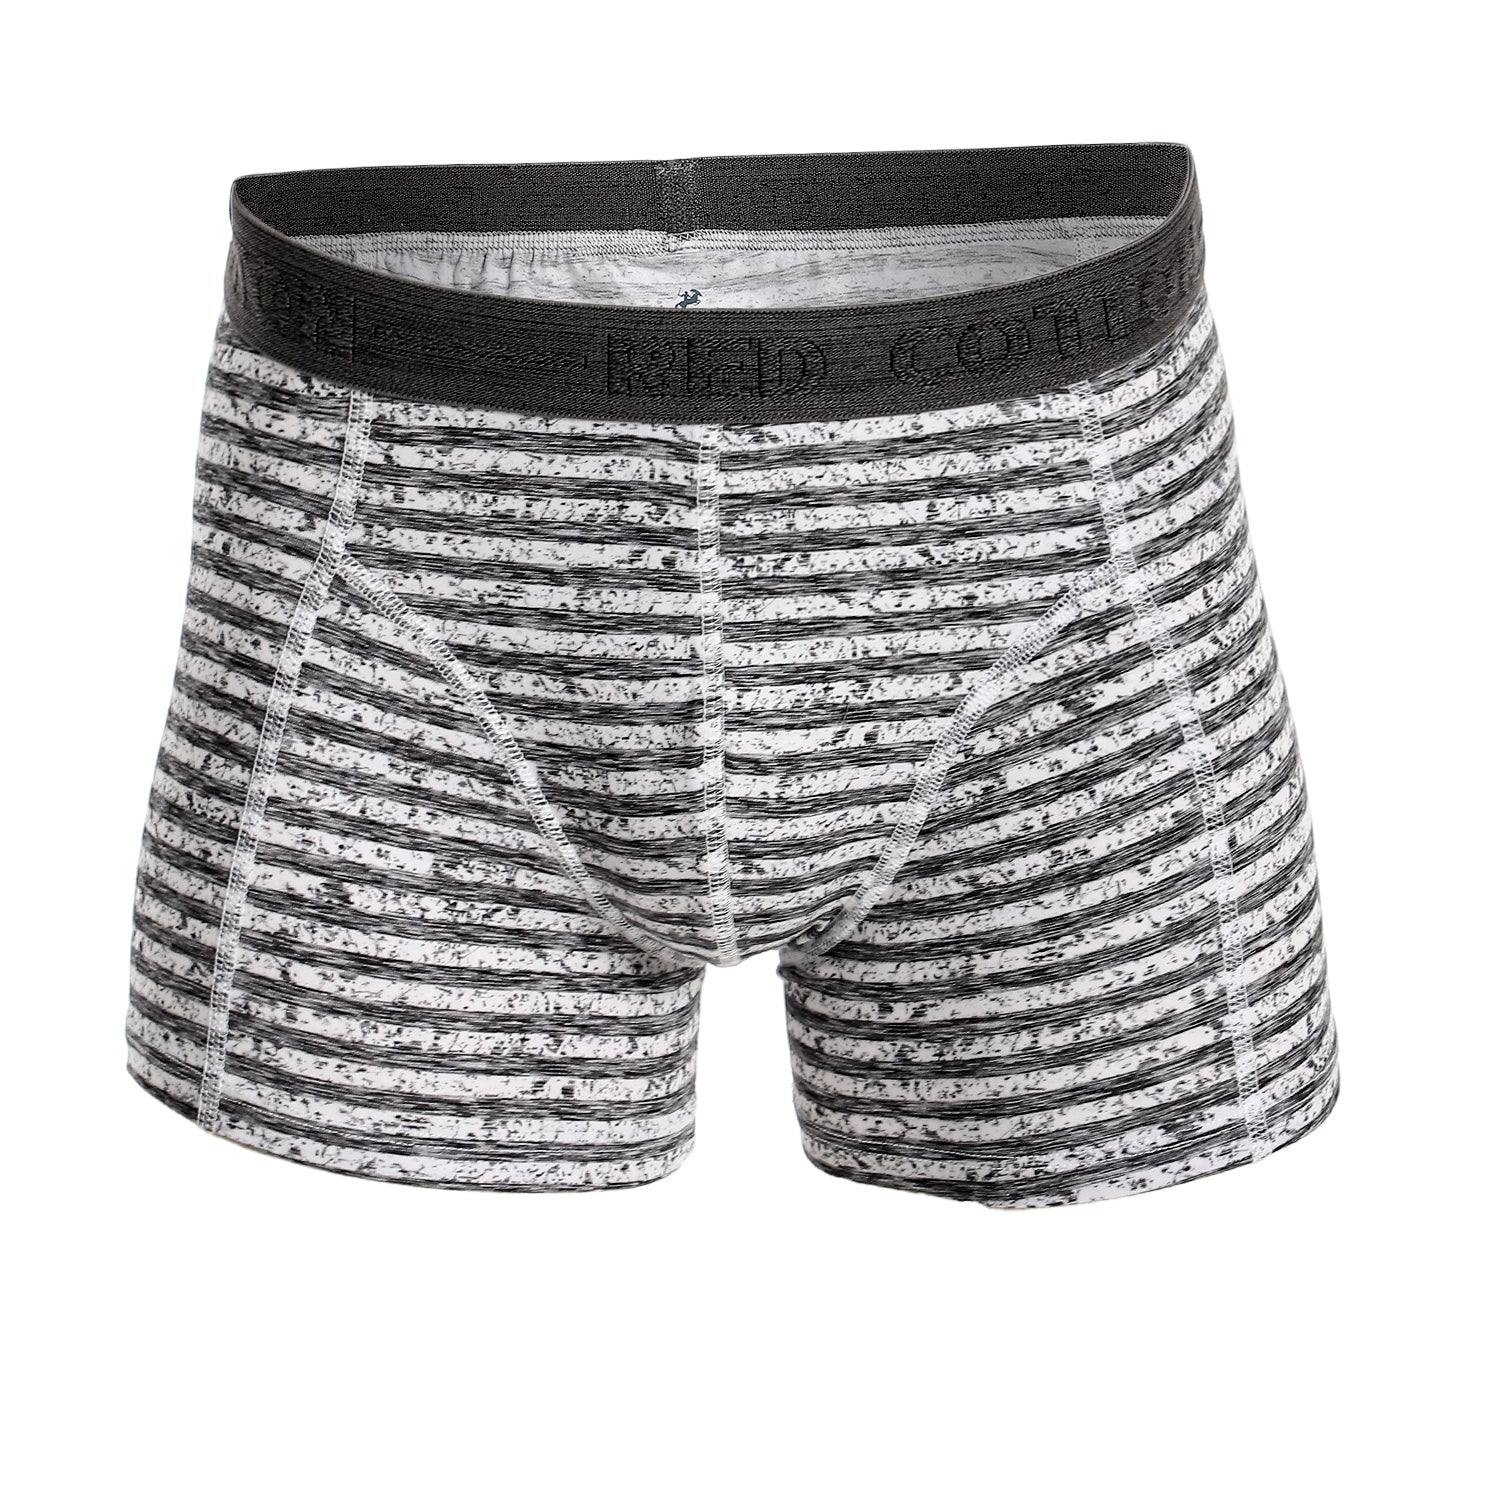 Comfortable men's boxer from Redcotton